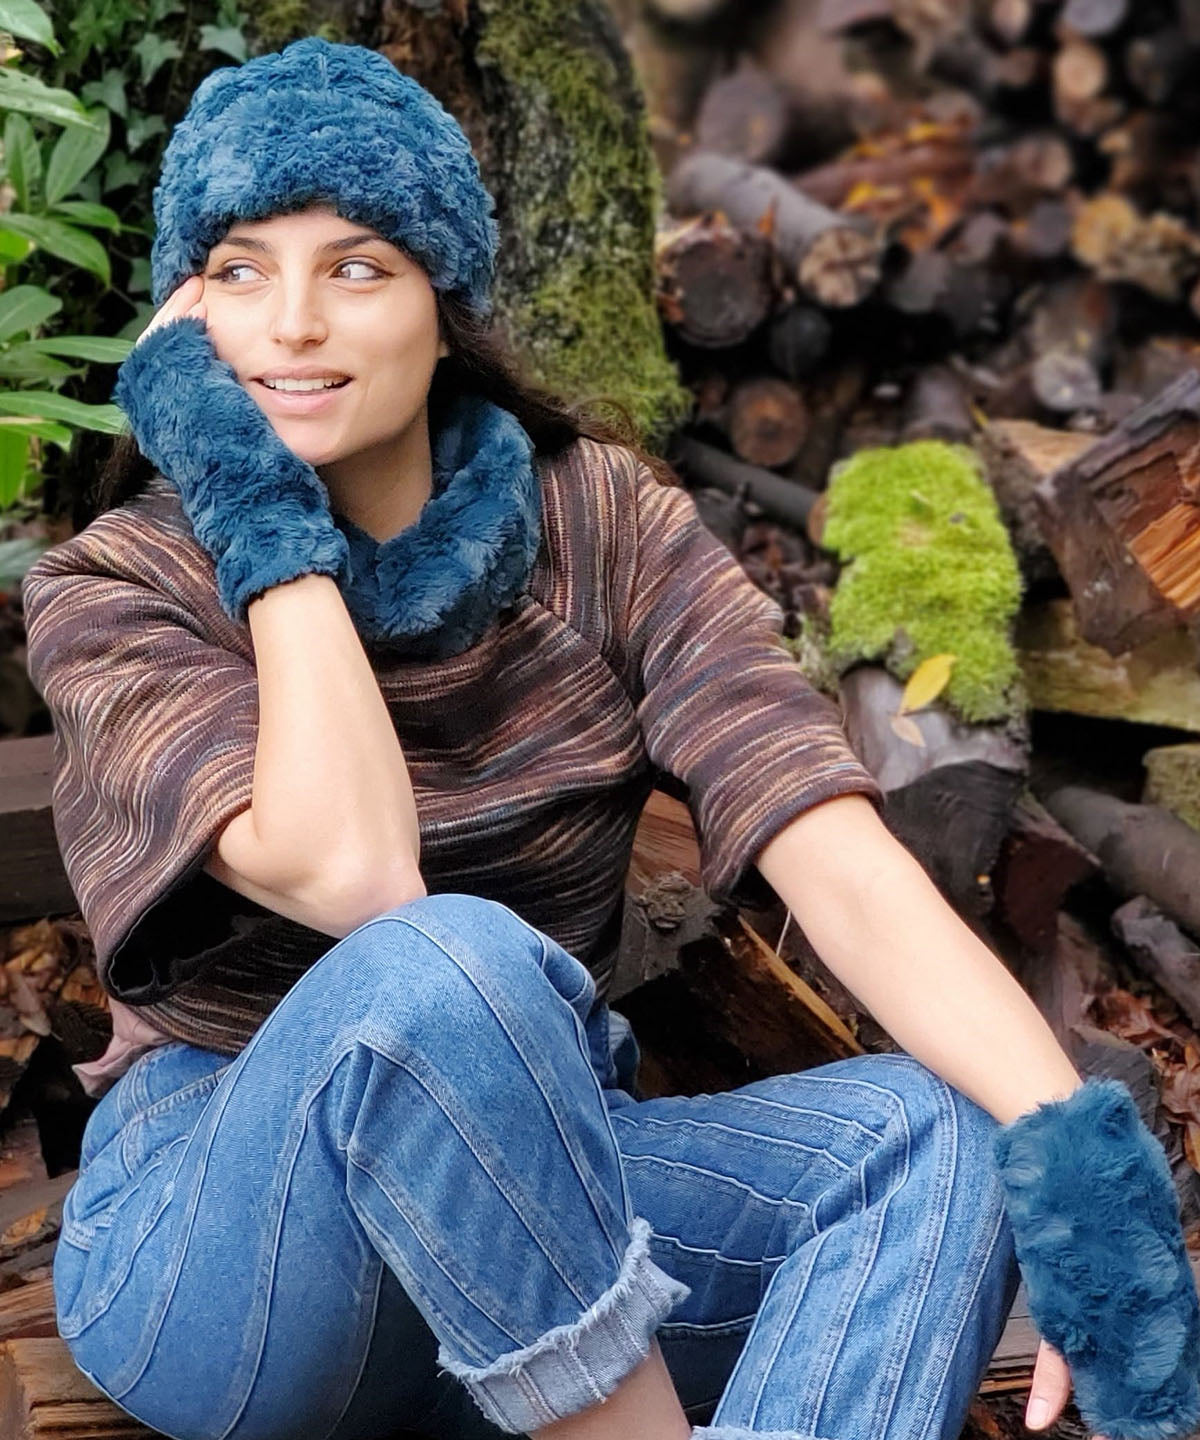 Model Sitting on log wearing Sweater Top | Sweet Stripes in  English Toffee Knit with Peacock Pond Faux Fur Collar | Matching  Headband and Fingerless Gloves in Peacock Pond, Teal Faux Fur Featured | Handmade in the USA by Pandemonium Seattle